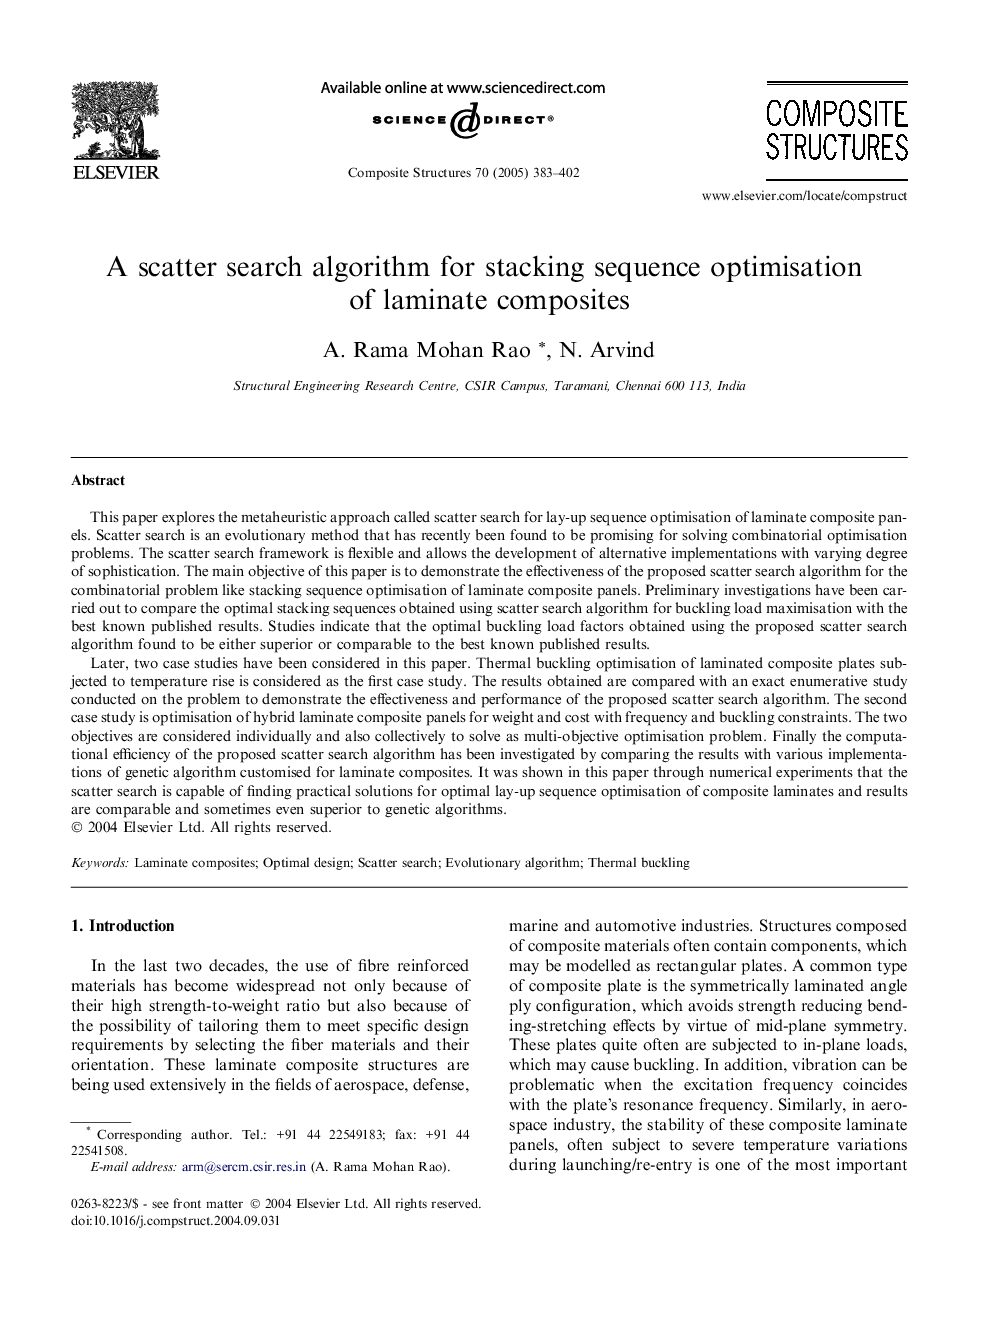 A scatter search algorithm for stacking sequence optimisation of laminate composites